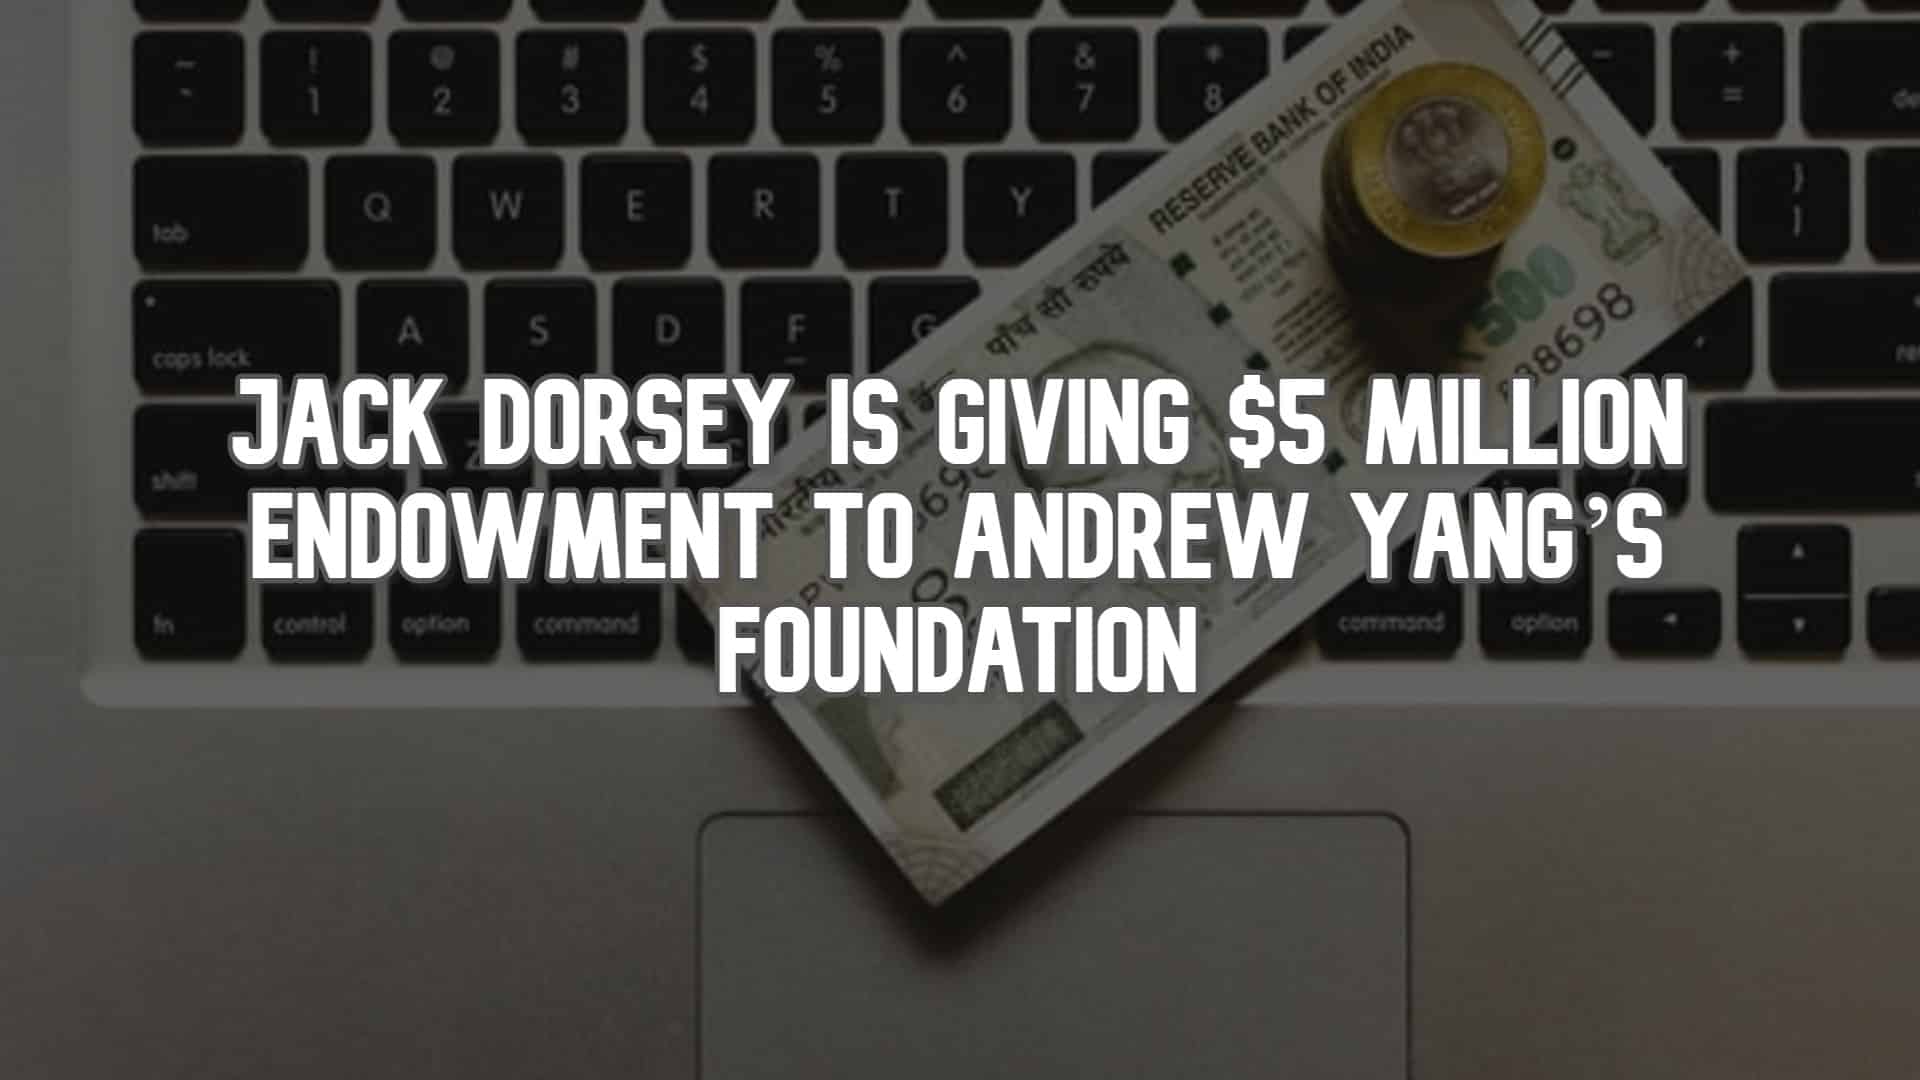 Jack Dorsey is Giving $5 Million Endowment to Andrew Yang’s Foundation